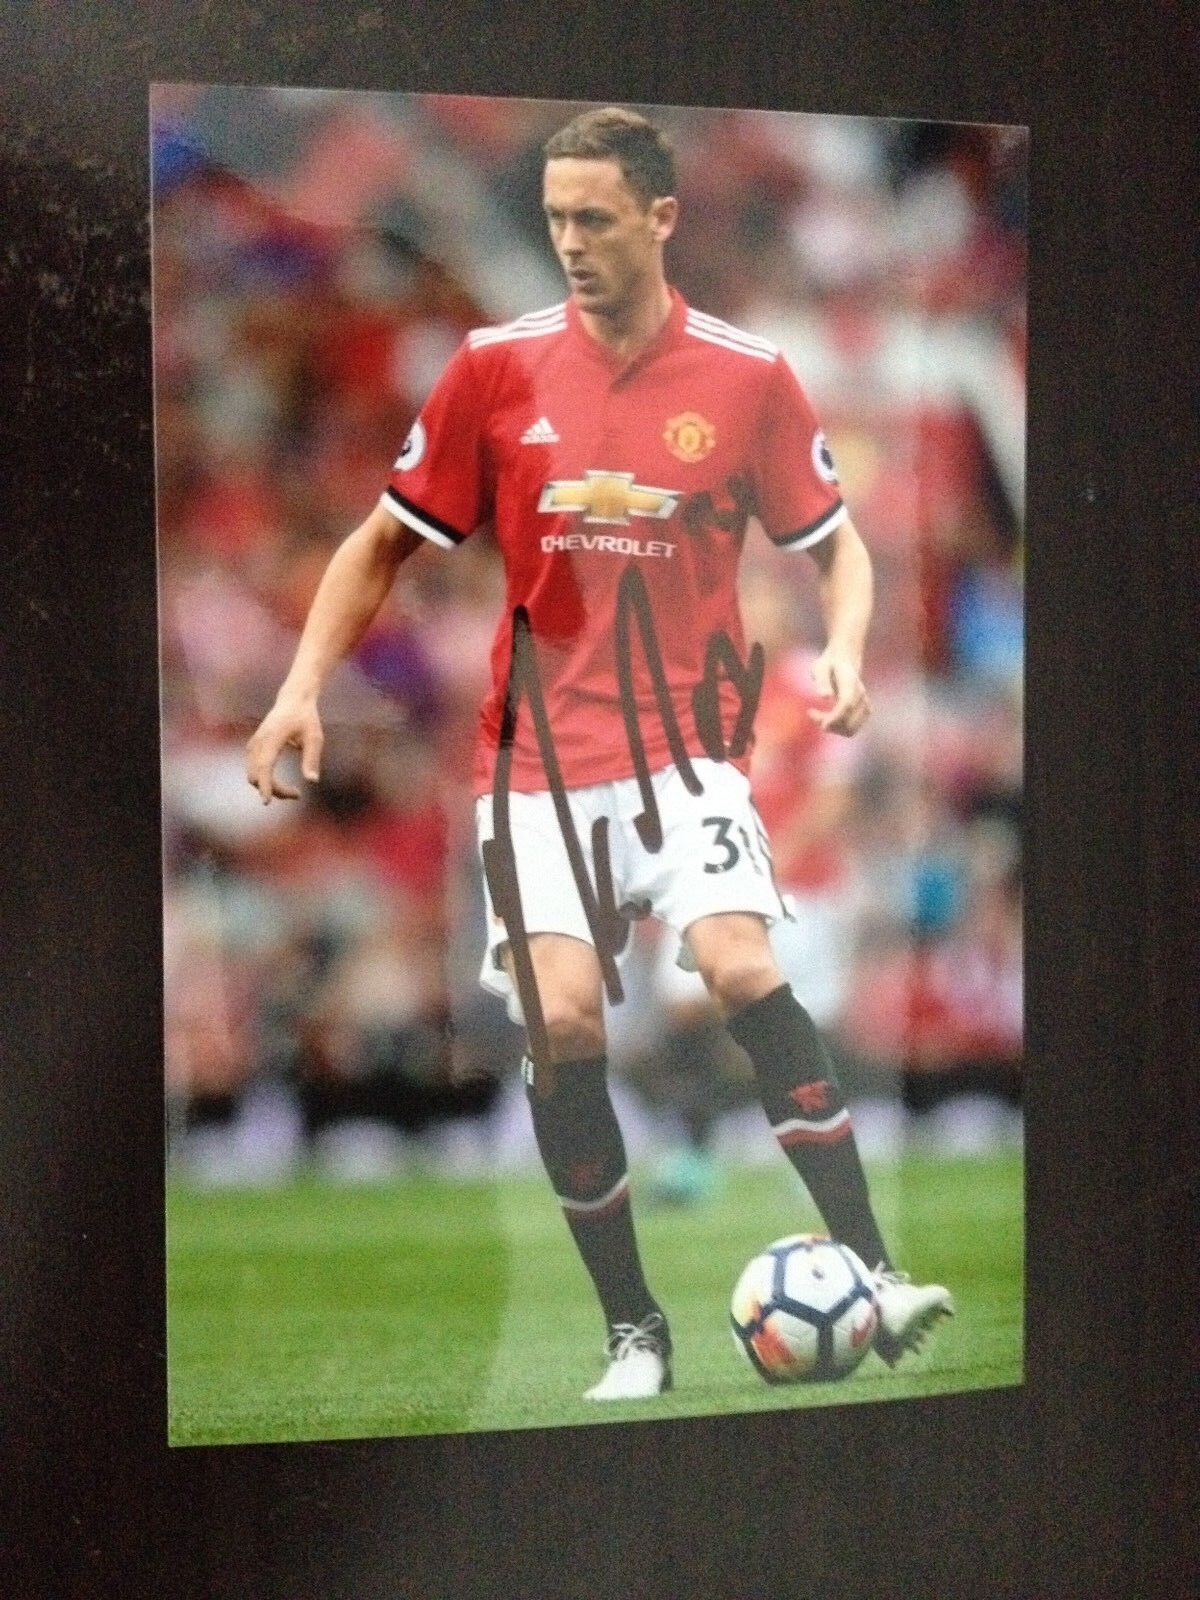 NEMANJA MATIC - MANCHESTER UNITED FOOTBALLER - EXCELLENT SIGNED COLOUR Photo Poster painting